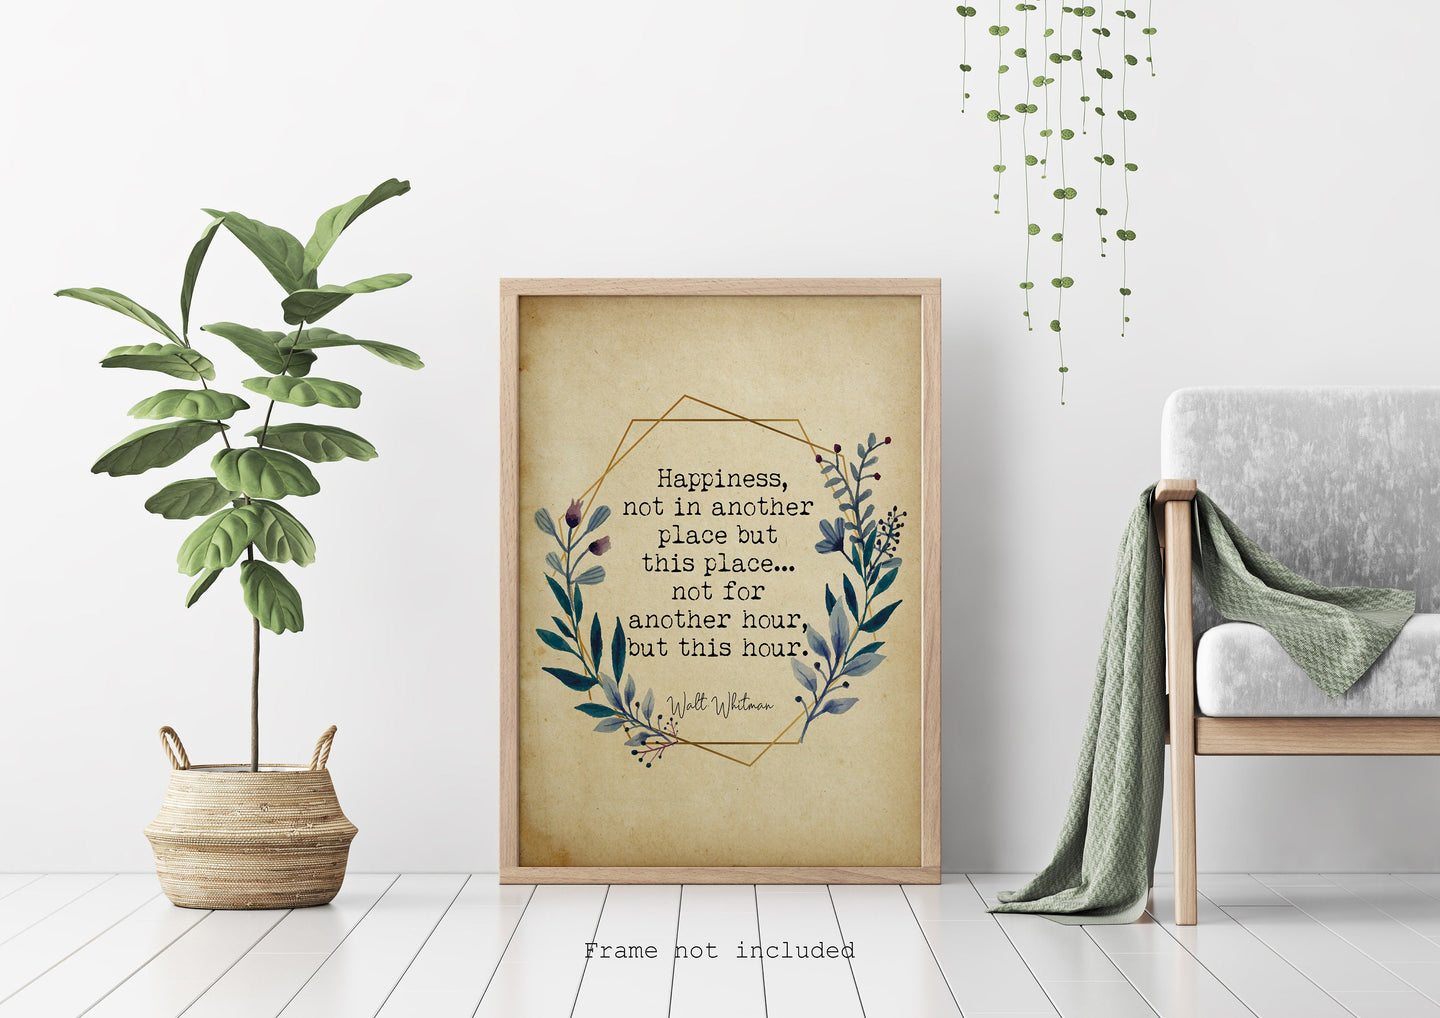 Walt Whitman Quote - Happiness, not in another place but this place - poetry print literary wall art print UNFRAMED